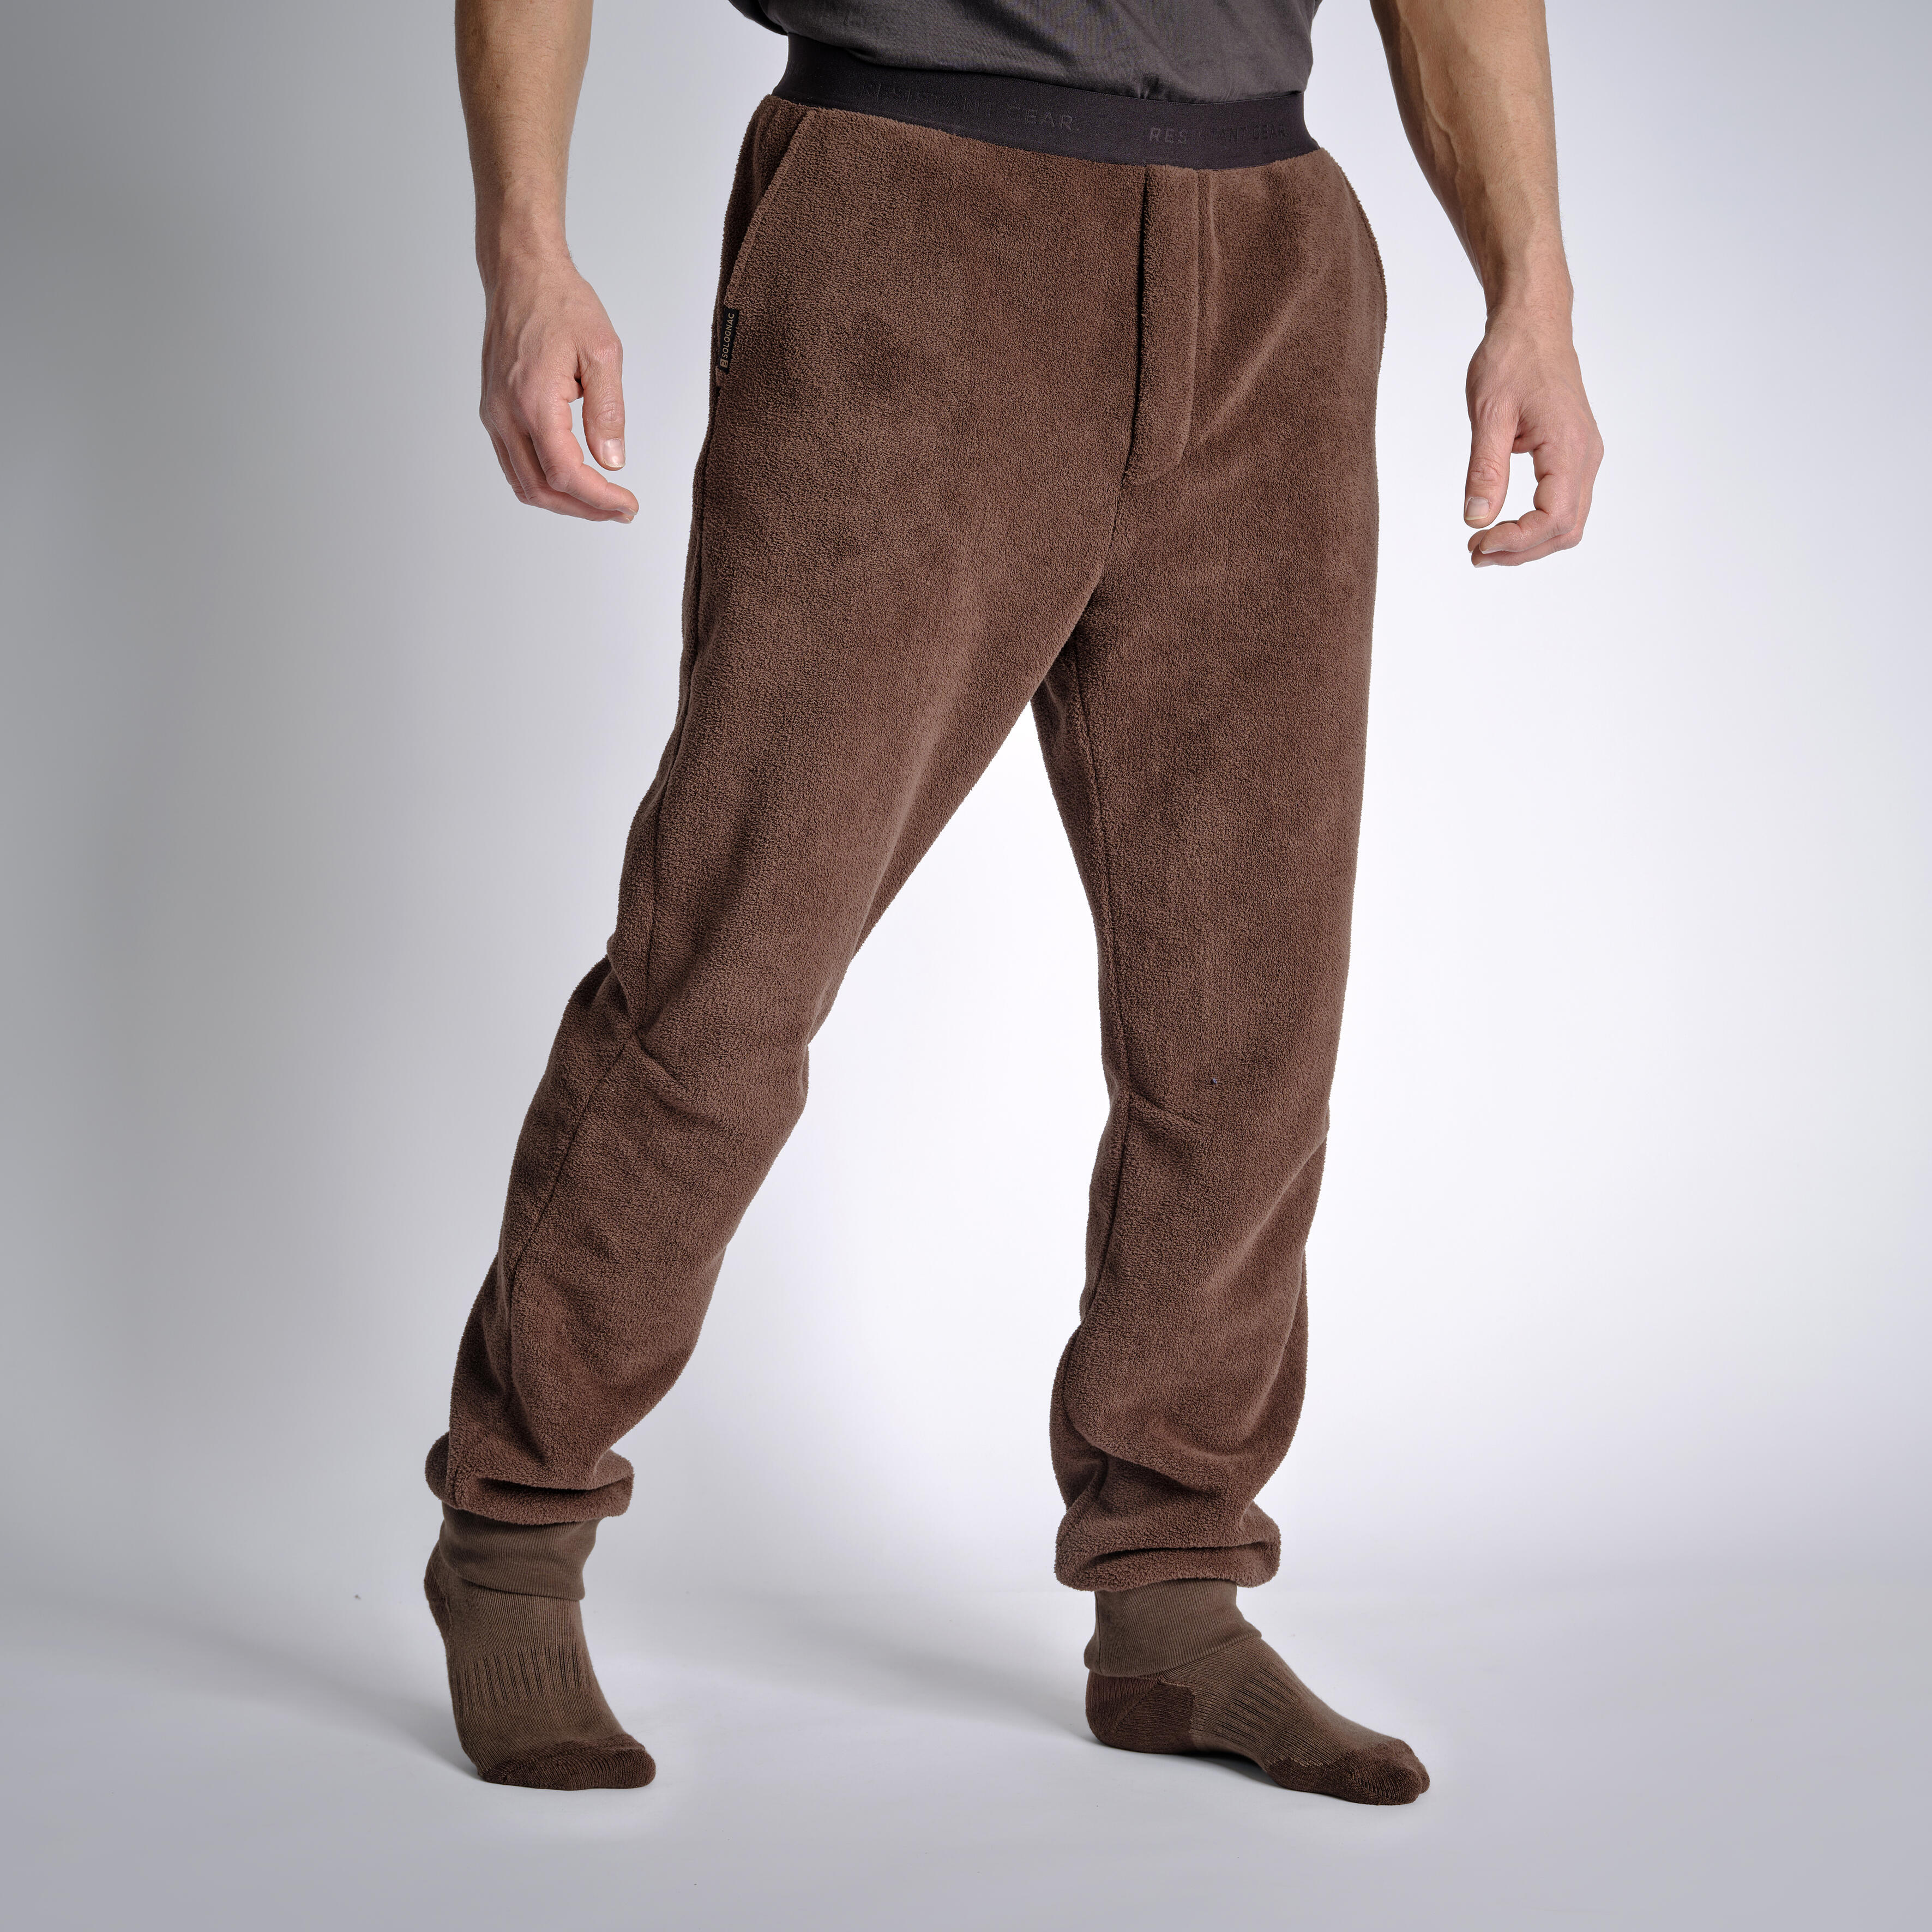 Medieval Hose or Trousers. History, uses and the different styles